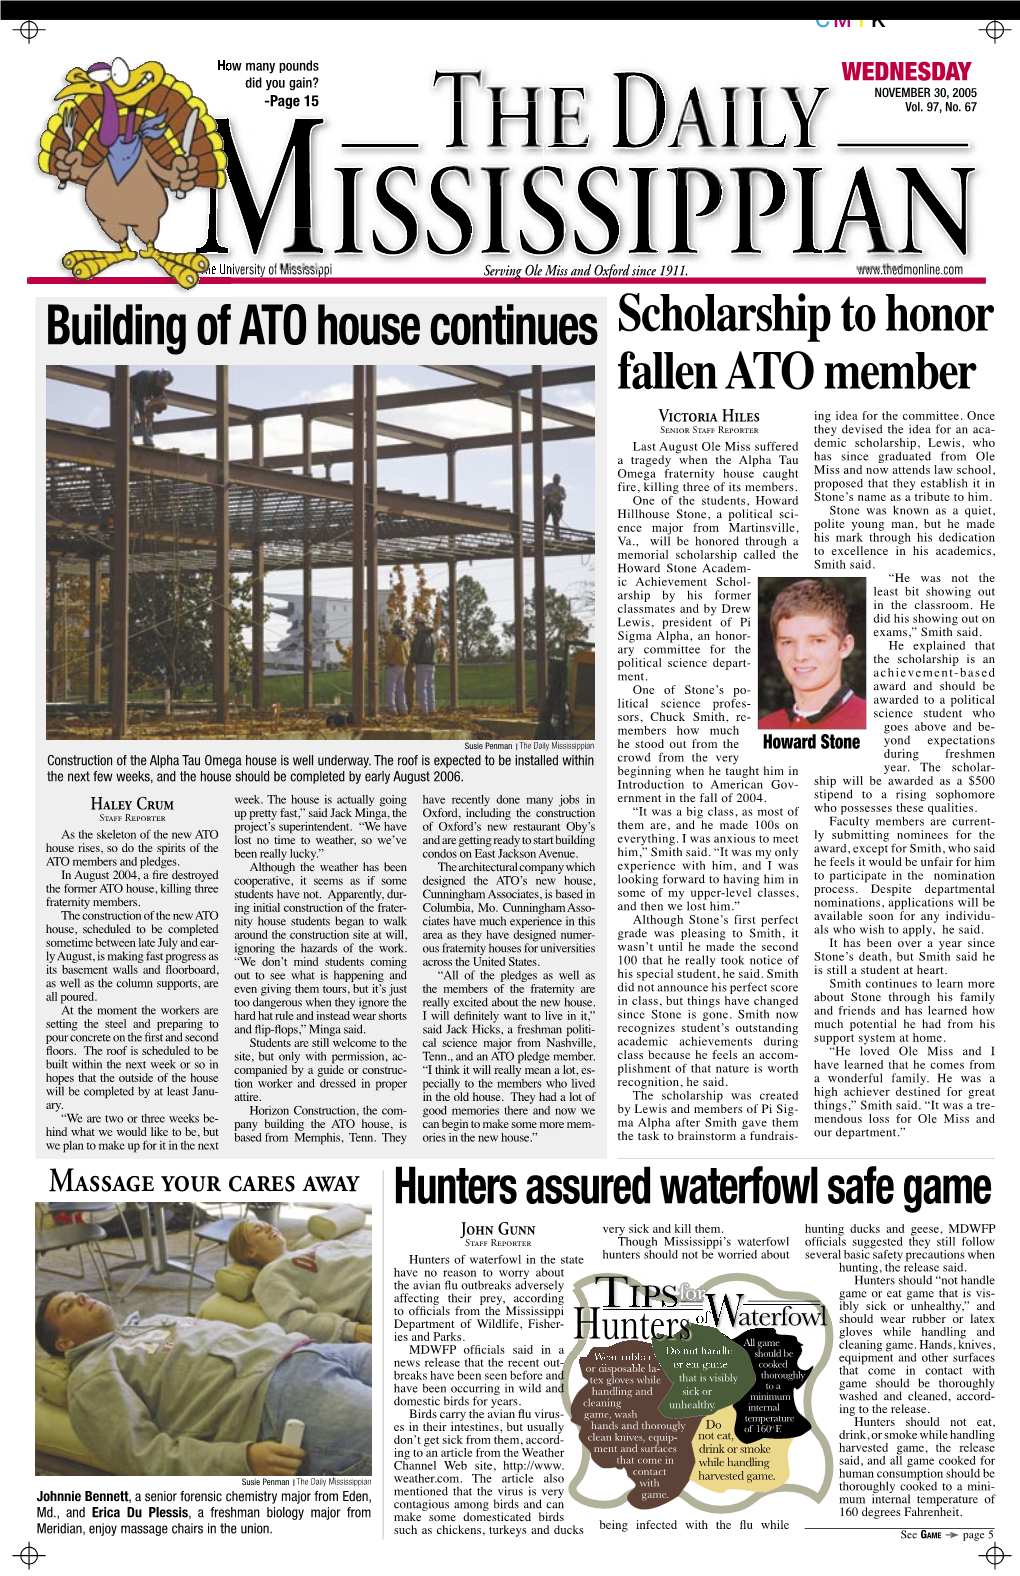 Building of ATO House Continues Scholarship to Honor Fallen ATO Member Victoria Hiles Ing Idea for the Committee